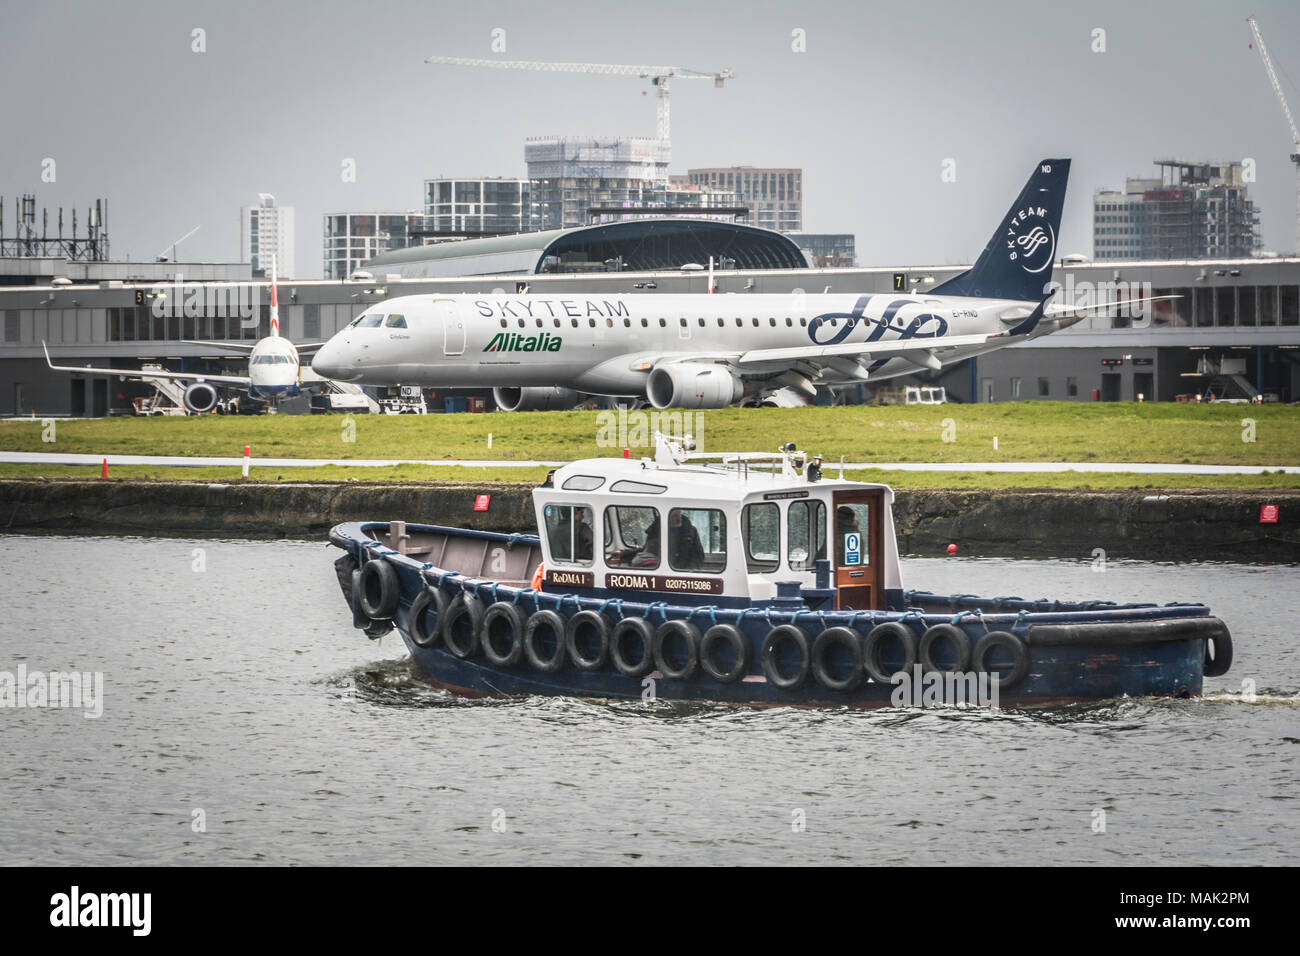 An Alitalia Skyteam Embraer 190 jet on the tarmac at London City Airport, in the London Borough of Newham, London, UK Stock Photo